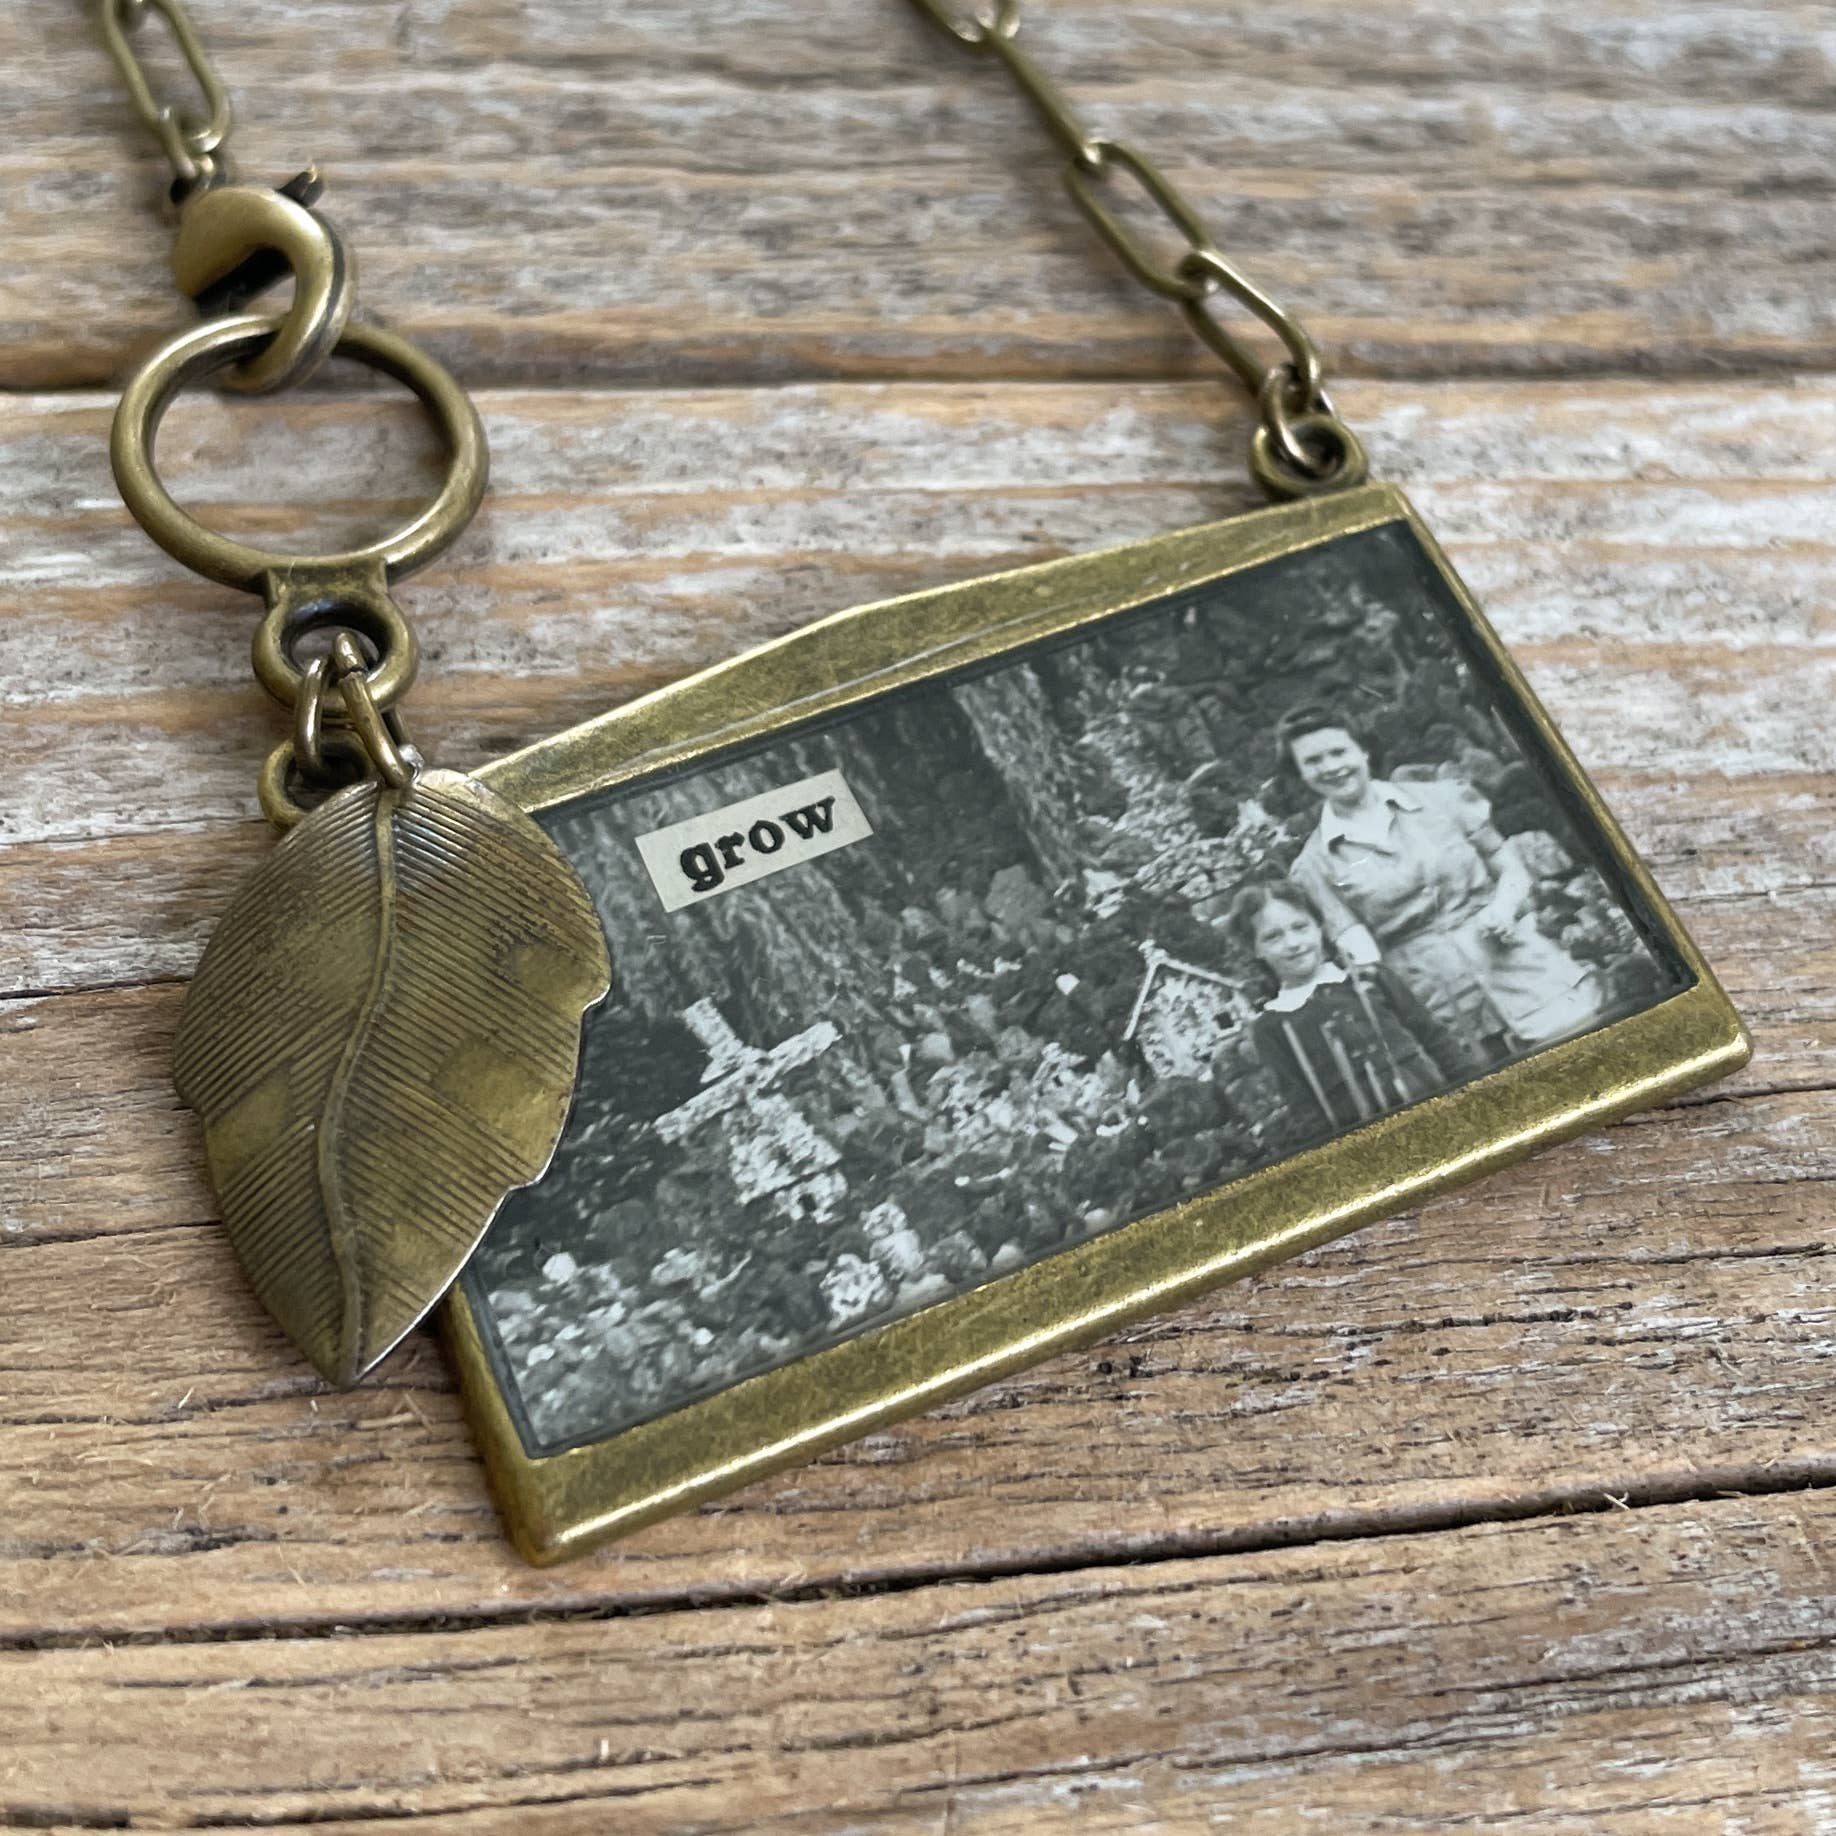 Garden Collection - Vintage Photo Collage Necklace (AB): Grow